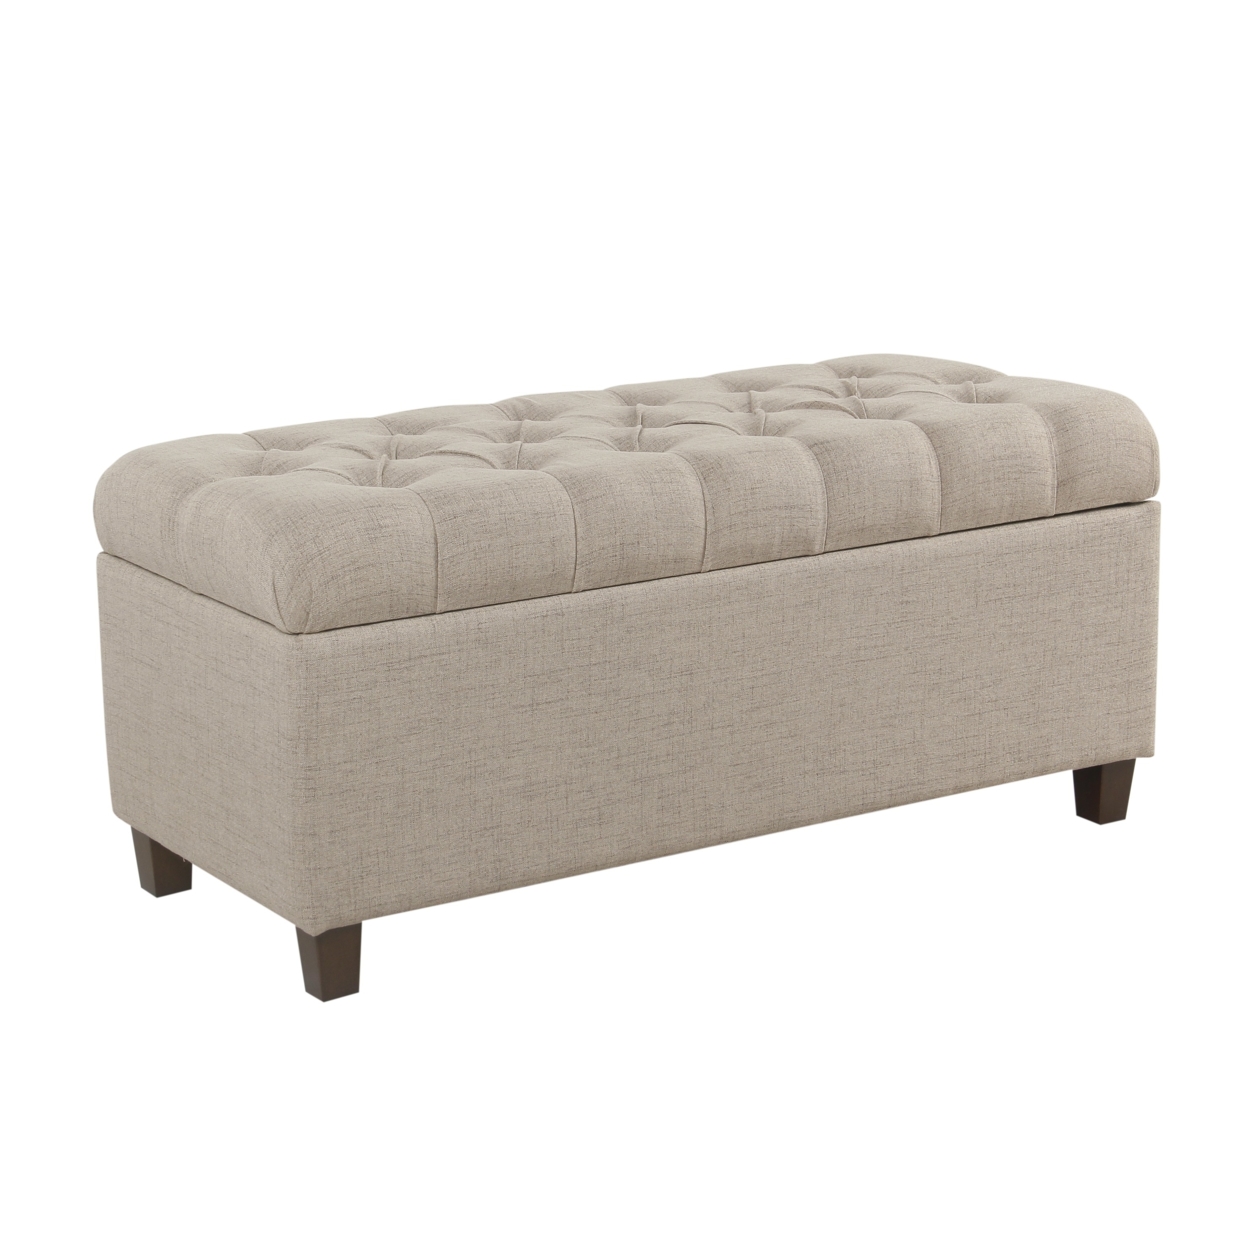 Saltoro Sherpi Fabric Upholstered Button Tufted Wooden Bench With Hinged Storage, Beige and Brown